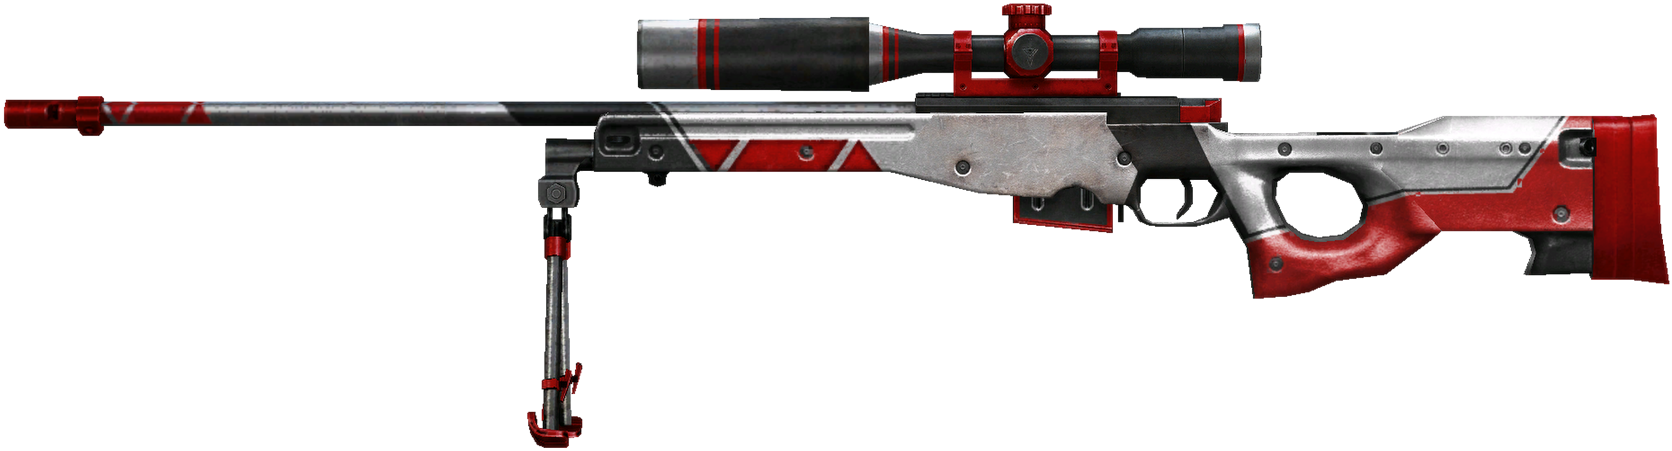 Awp Scope Csgo Png - Awm Cfs Crossfire Png (1920x1080), Png Download